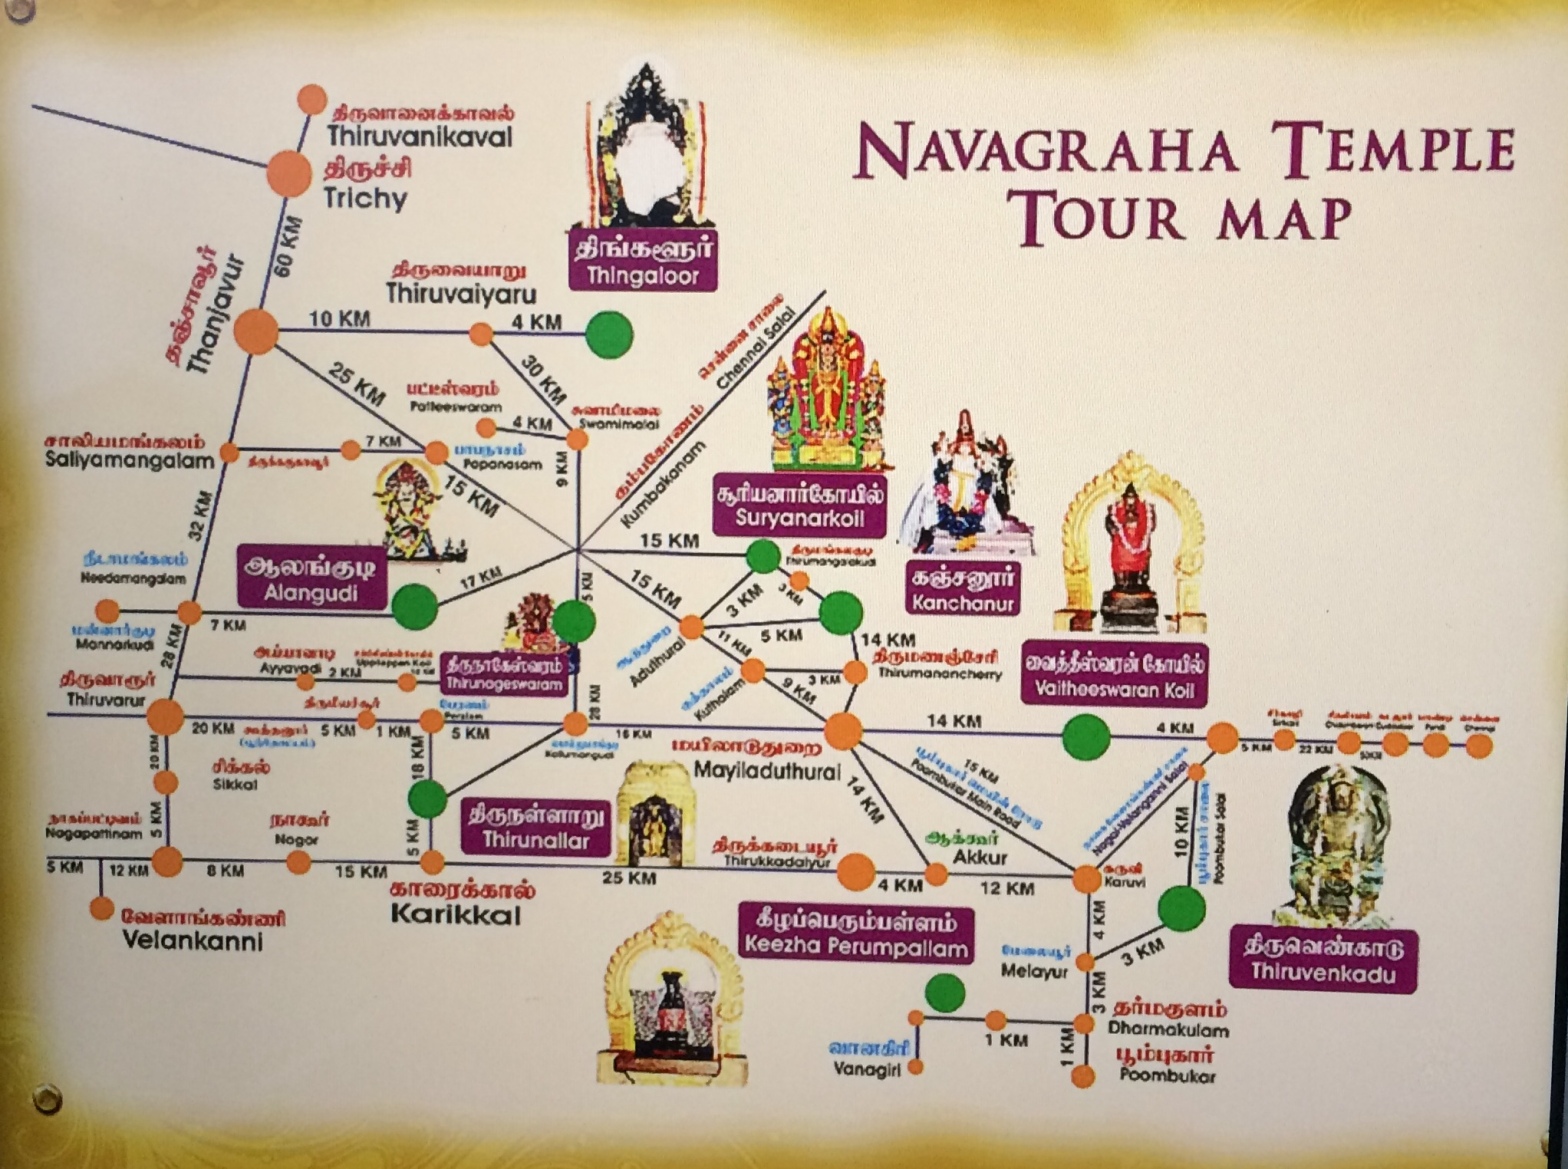 Temples of Tamil Nadu 2 – NAVAGRAHA TEMPLES – The common man's ...